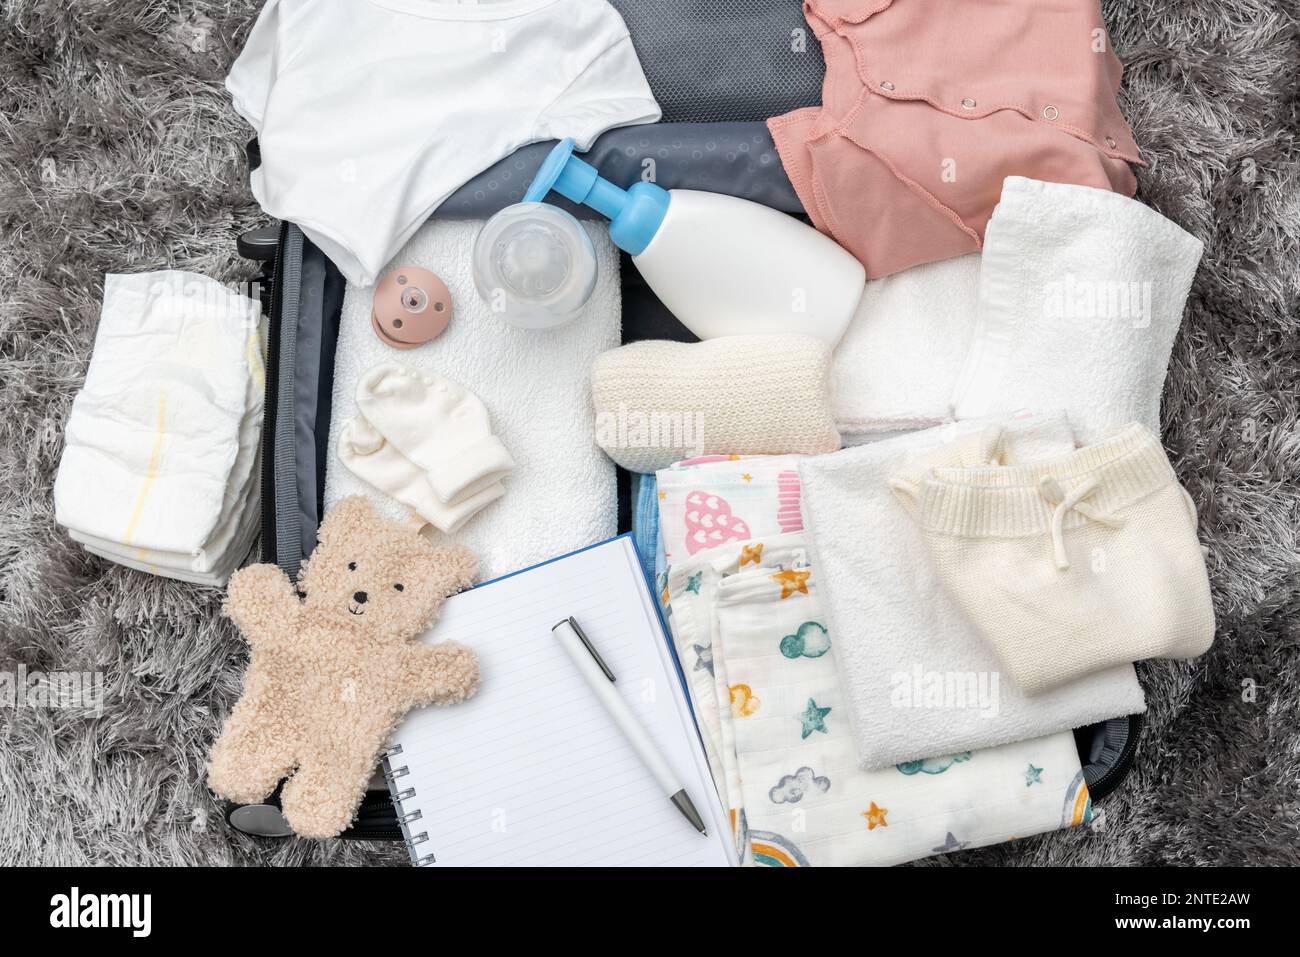 Open Bag For Maternity Hospital On The Floor Suitcase With Baby